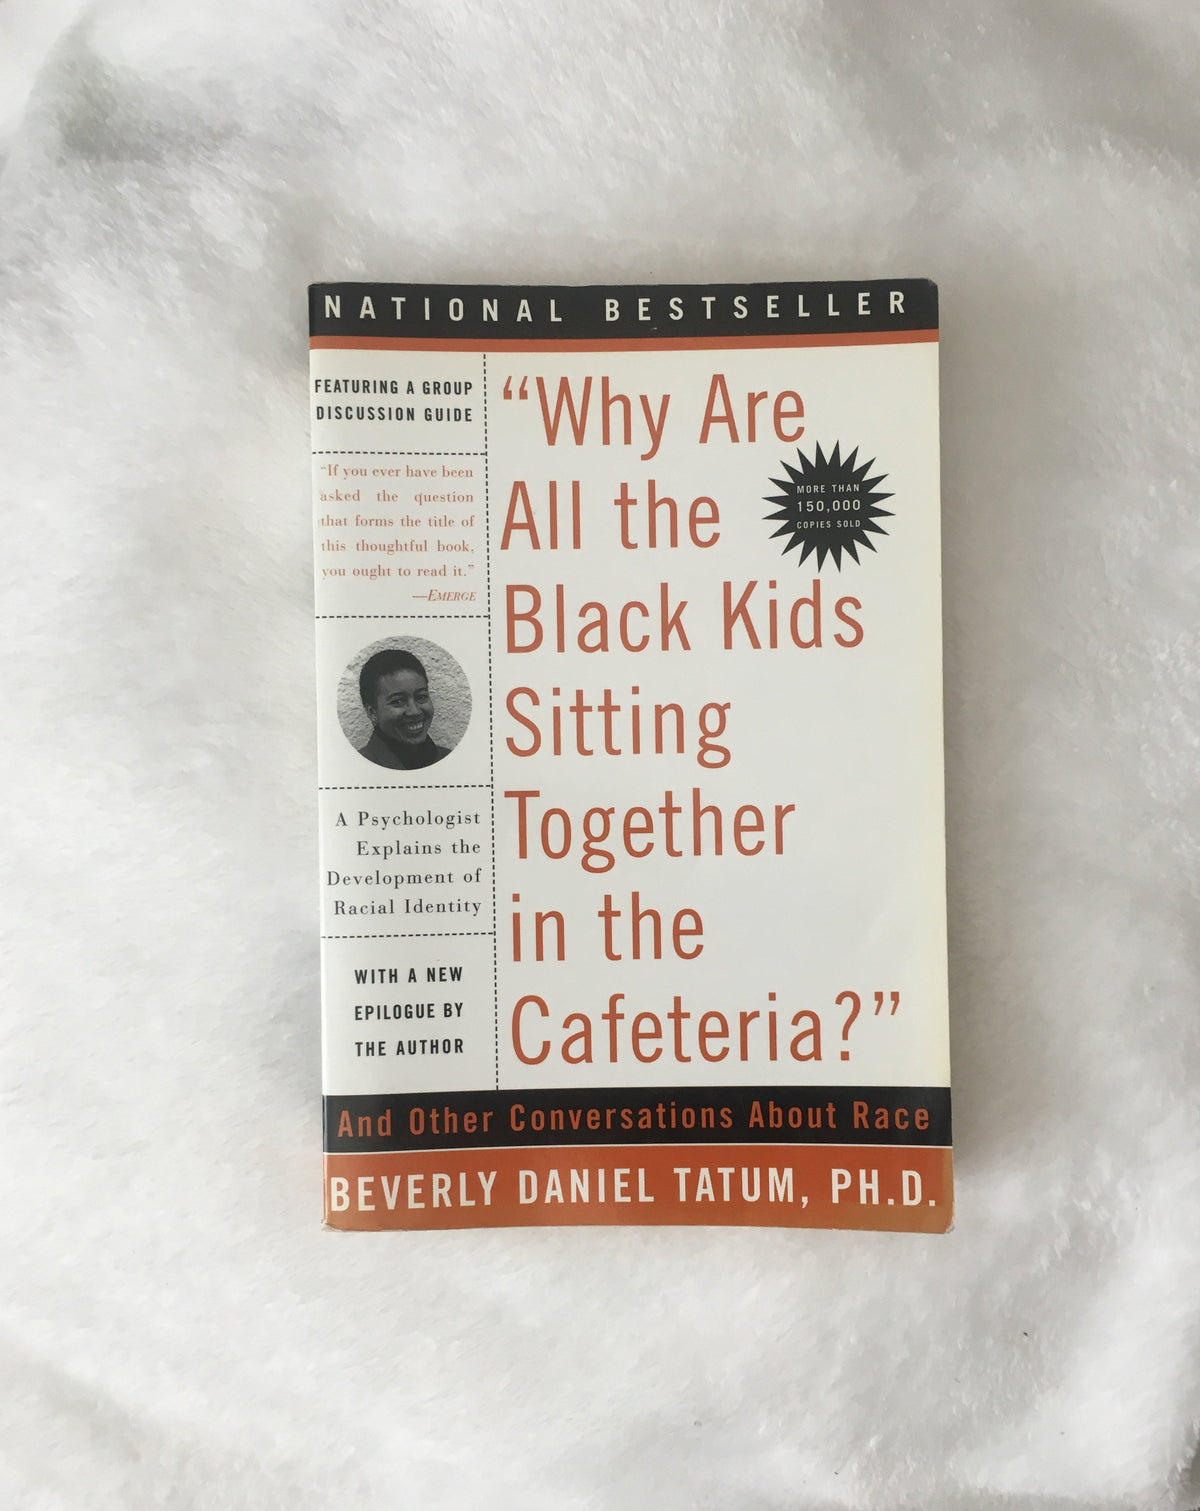 Why Are All the Black Kids Sitting Together in the Cafeteria? by Beverly Daniel Tatum, Book, Ten Dollar Books, Ten Dollar Books